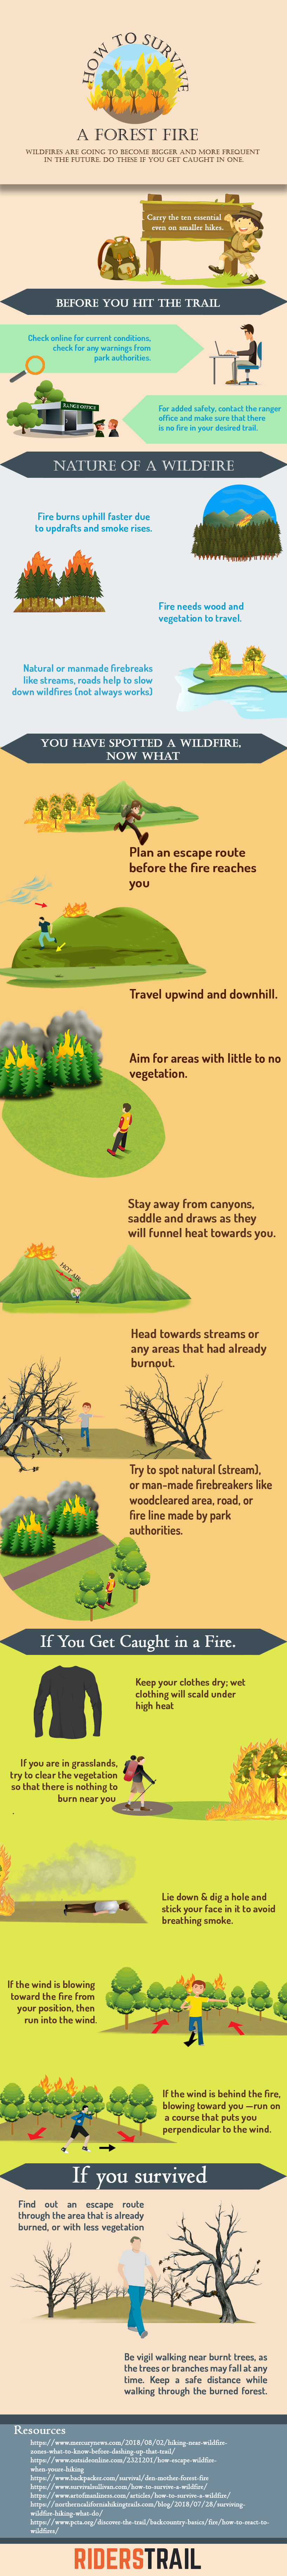 How to survive a forest fire while hiking